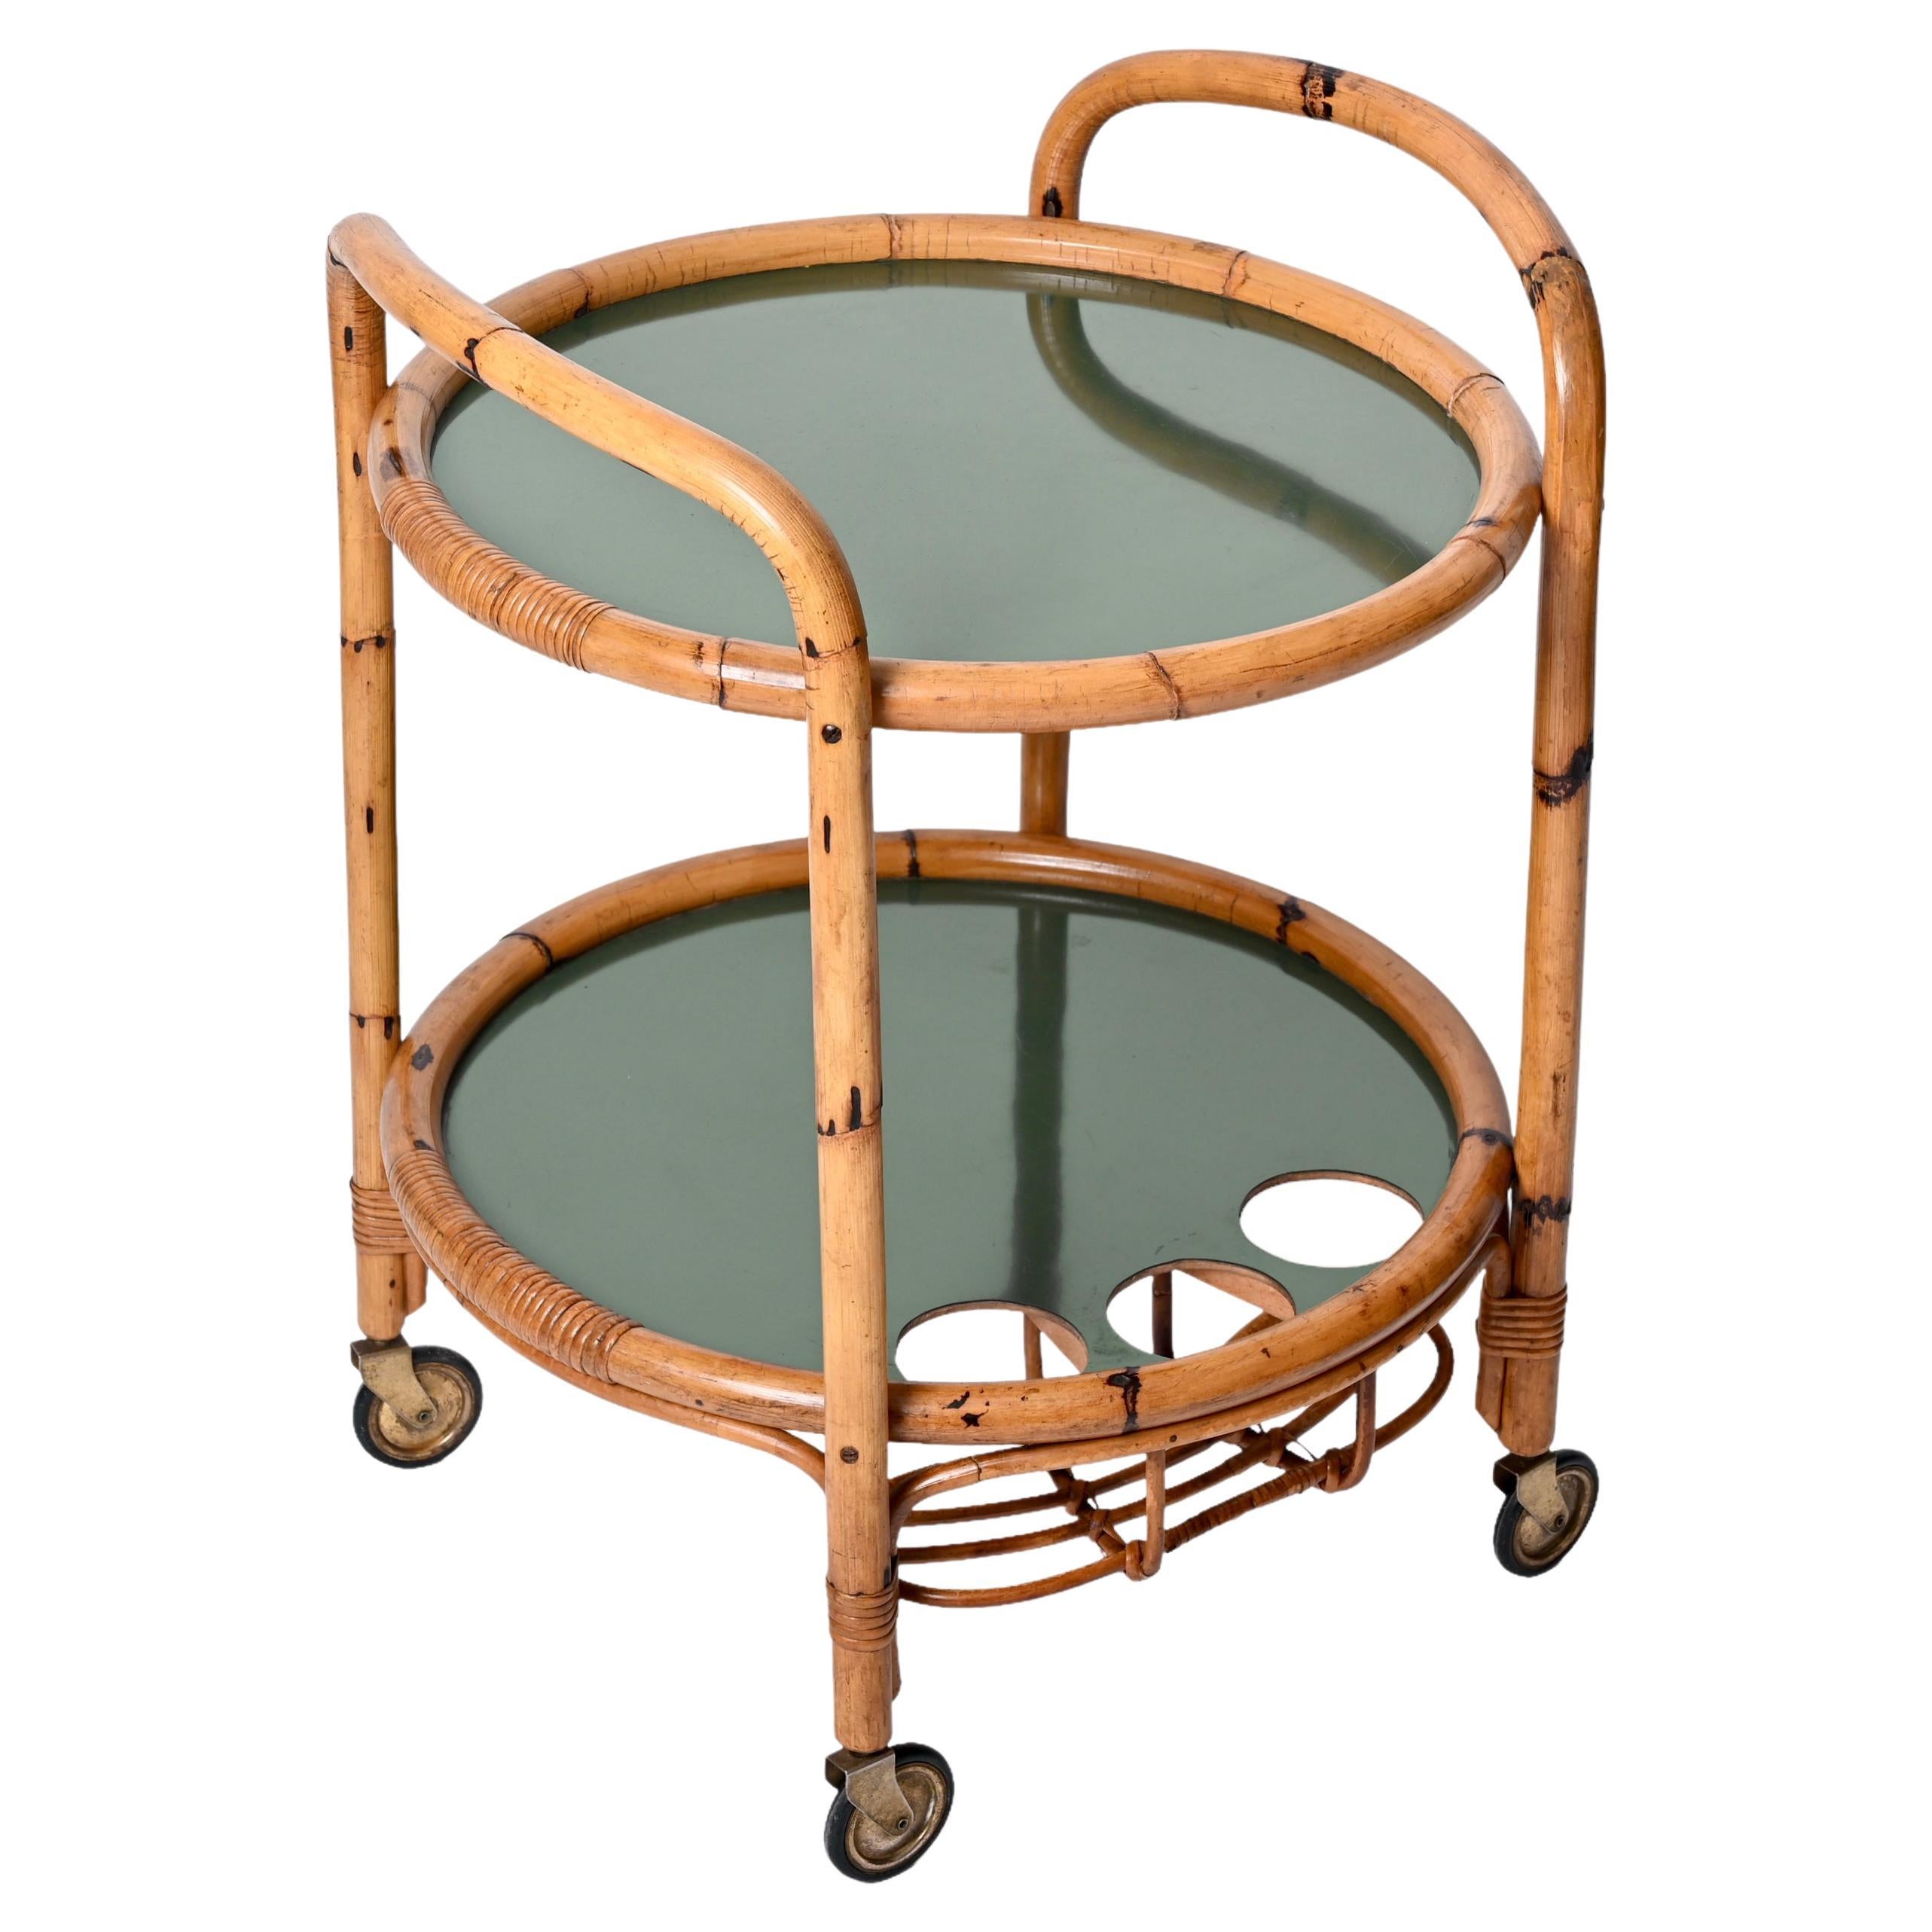 Midcentury Bar Serving Cart in Bamboo, Rattan and Green Formica, Italy, 1970s